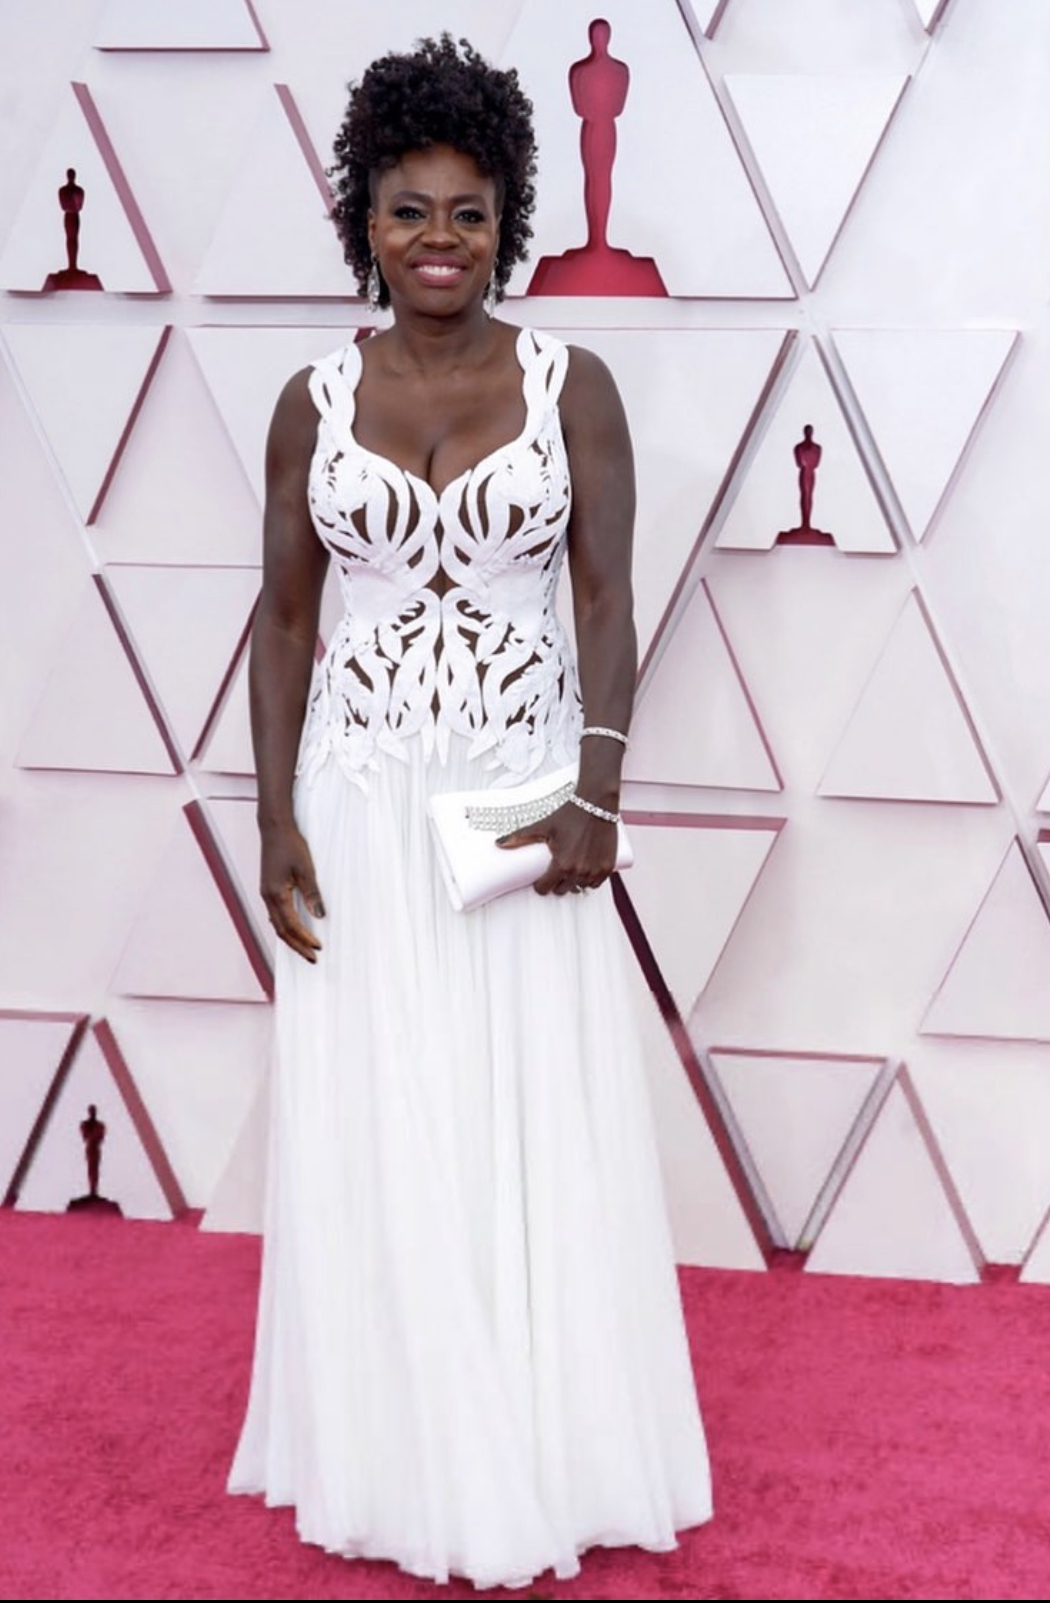 Oscars 2017: The Top 10 Best Dressed Actresses on the Red Carpet